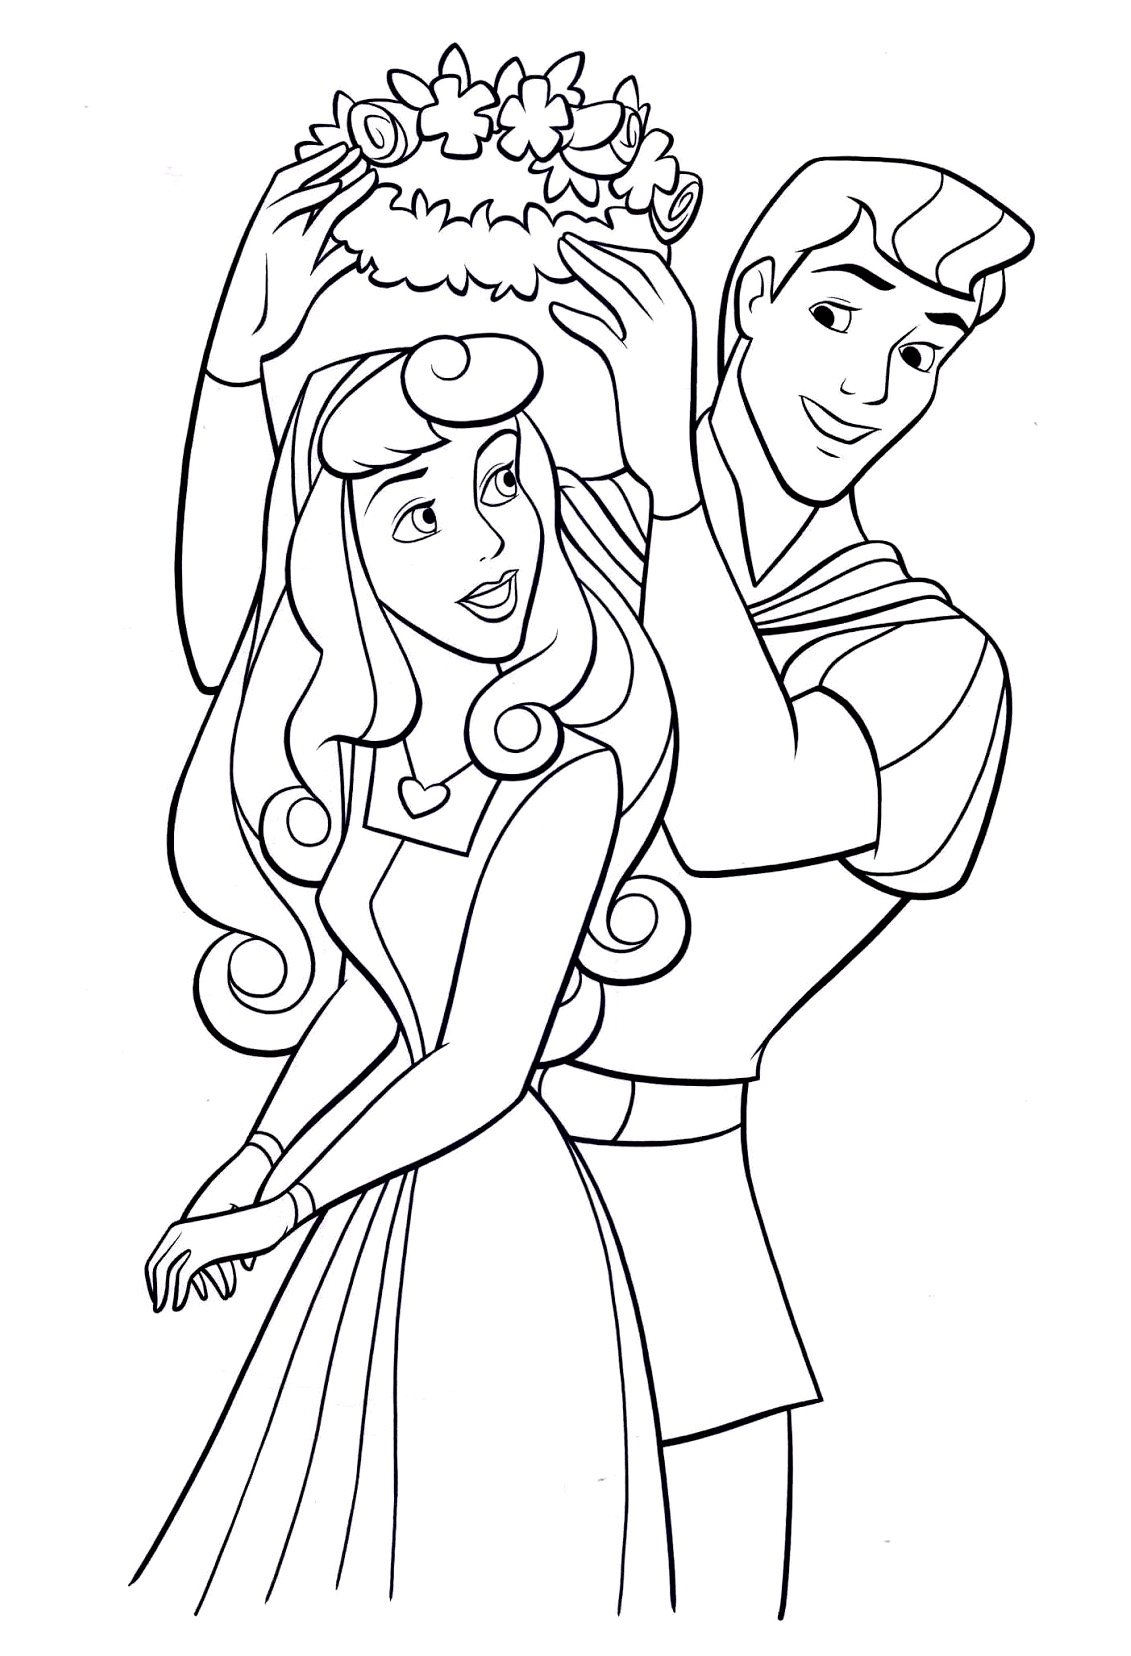 Preety Princess Aurora Coloring Page - Get Coloring Pages